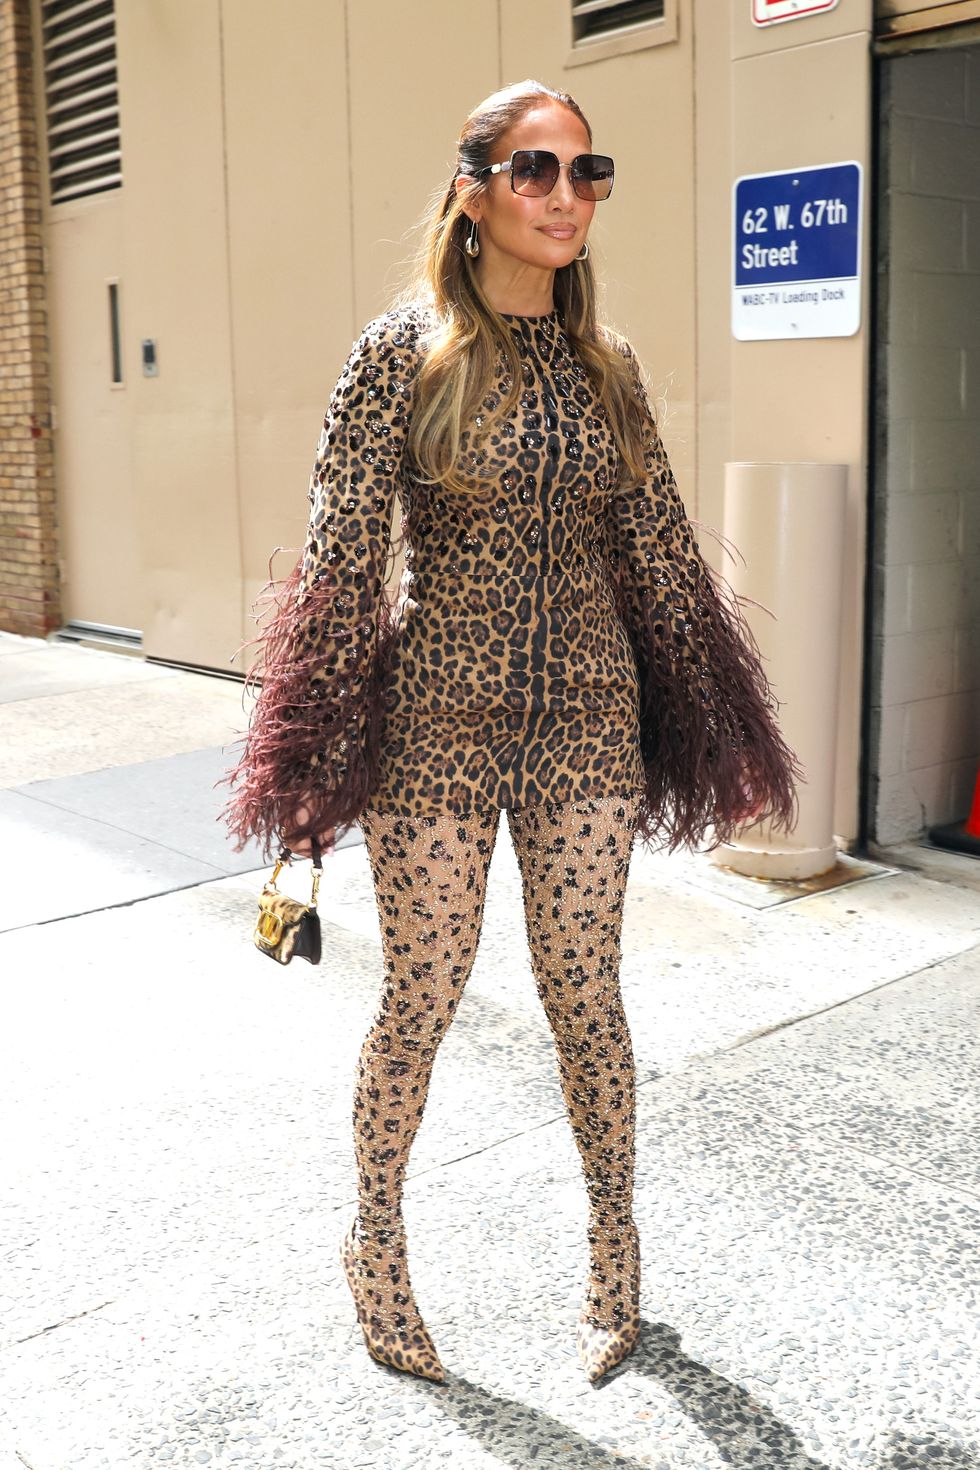 J.Lo Steps Out in NYC Wearing Head-to-Toe Leopard Print